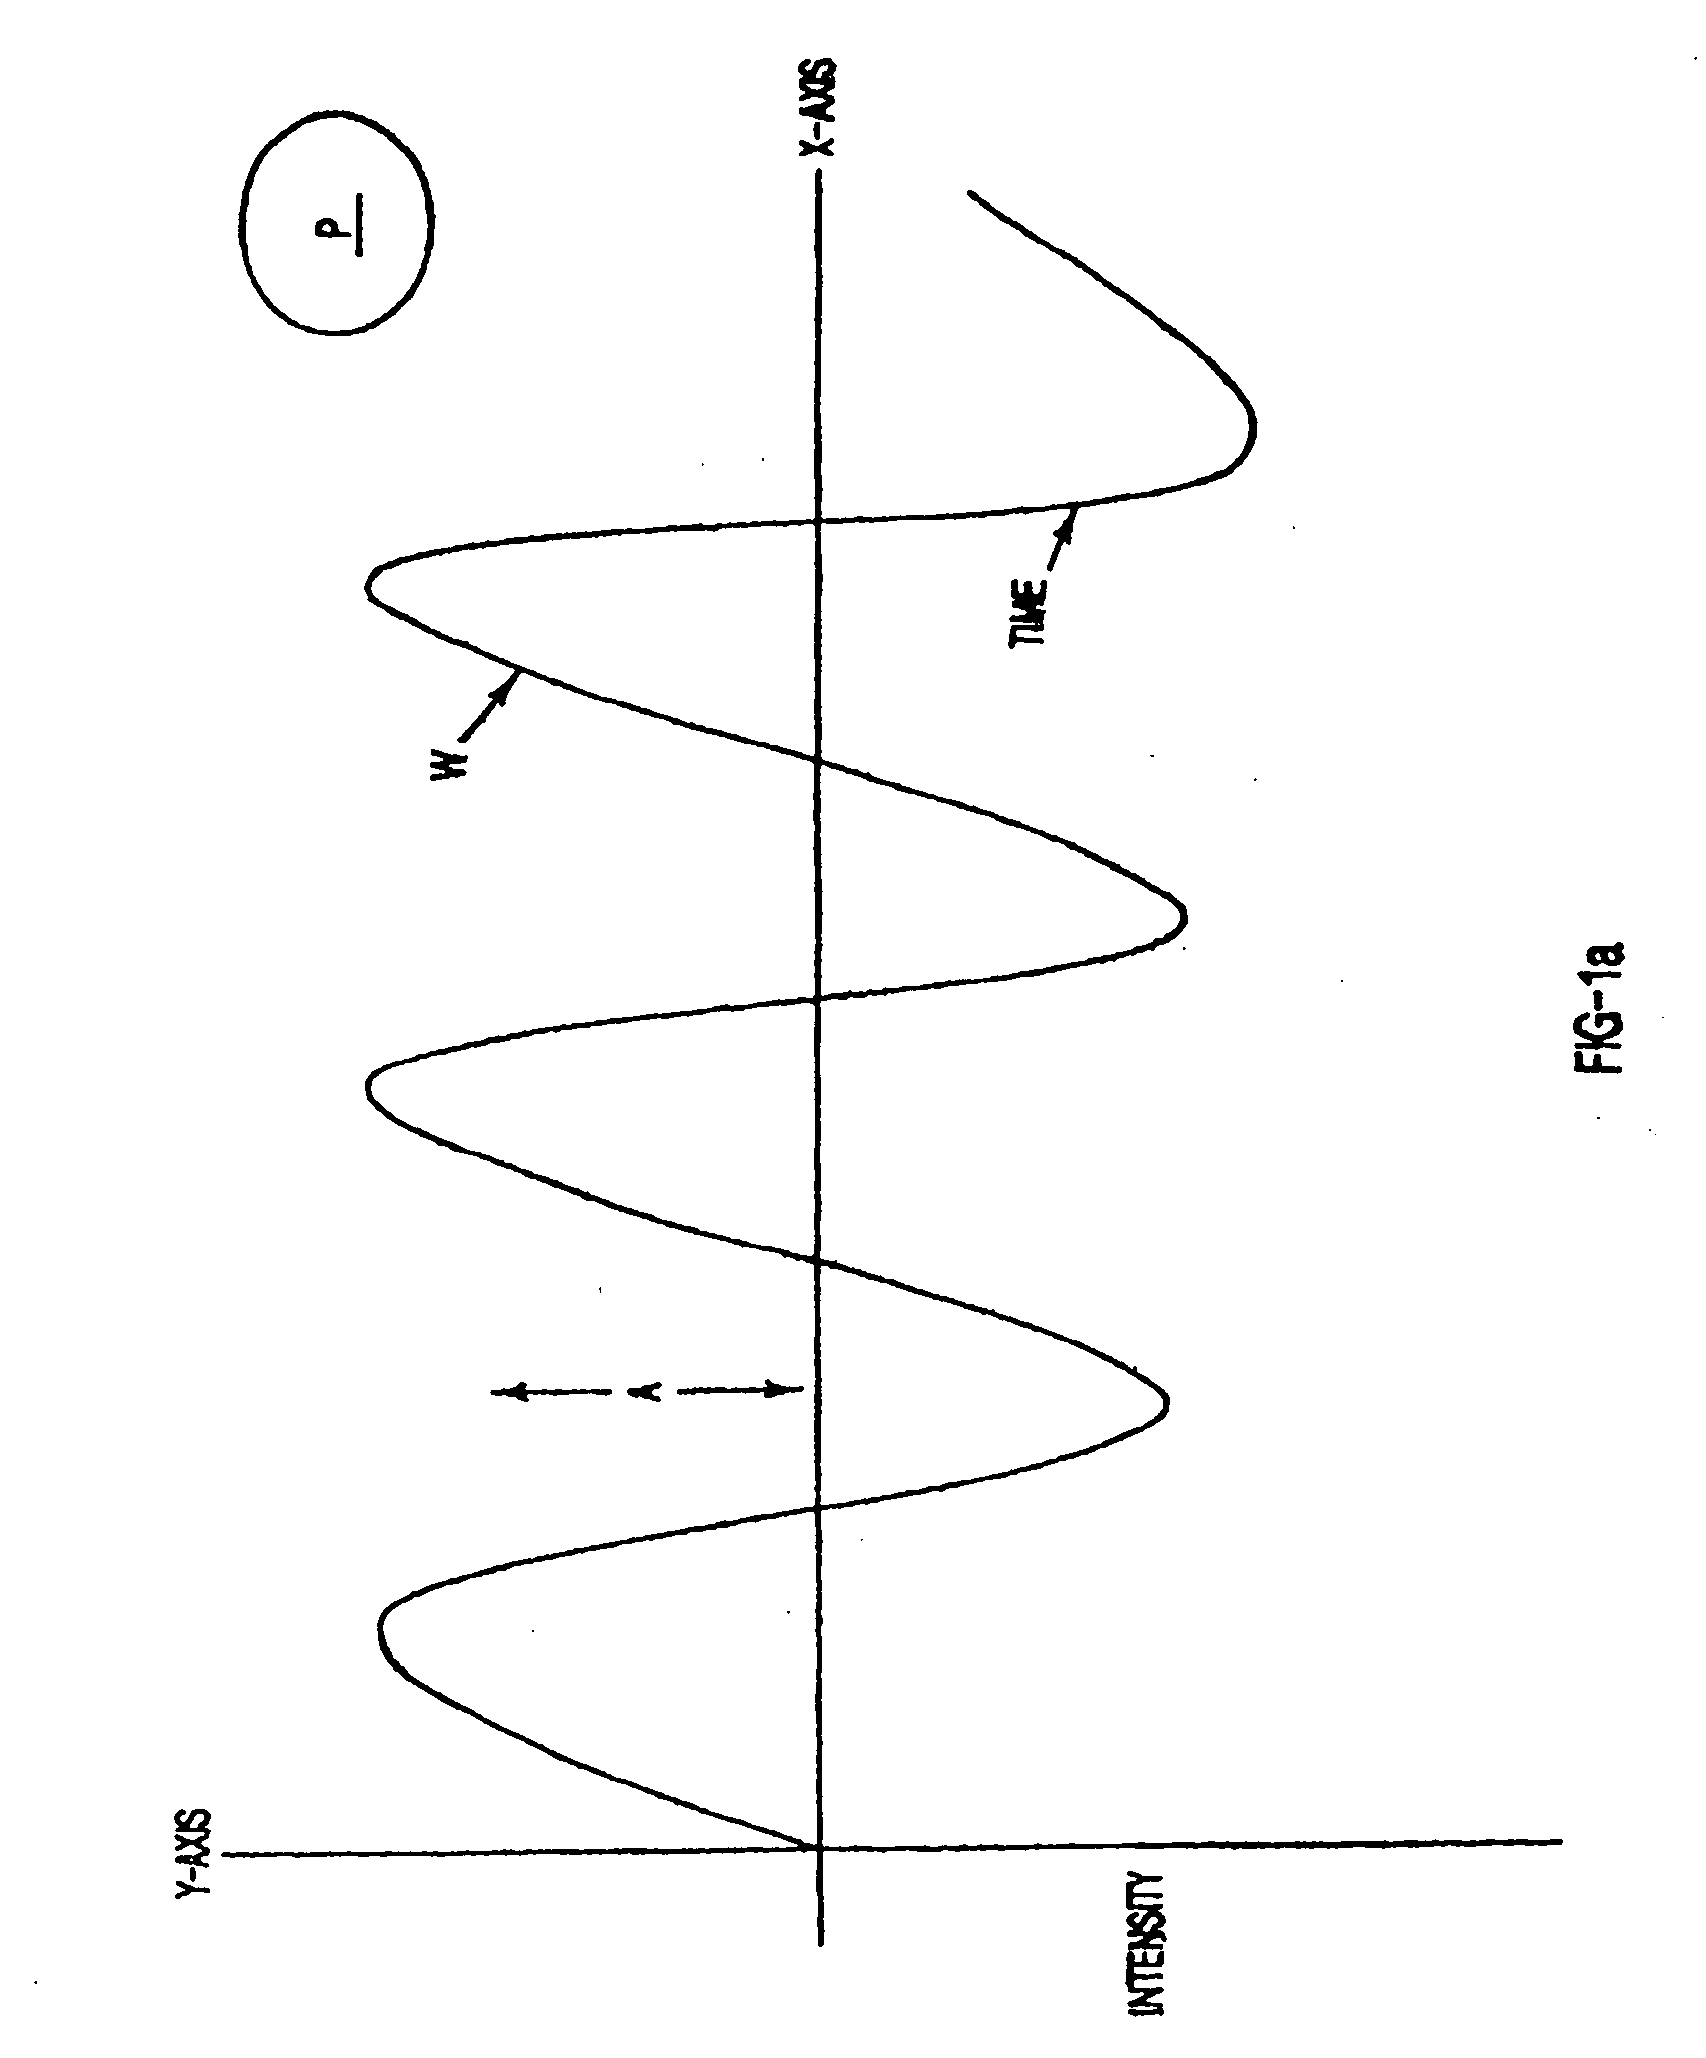 Object detection method and apparatus